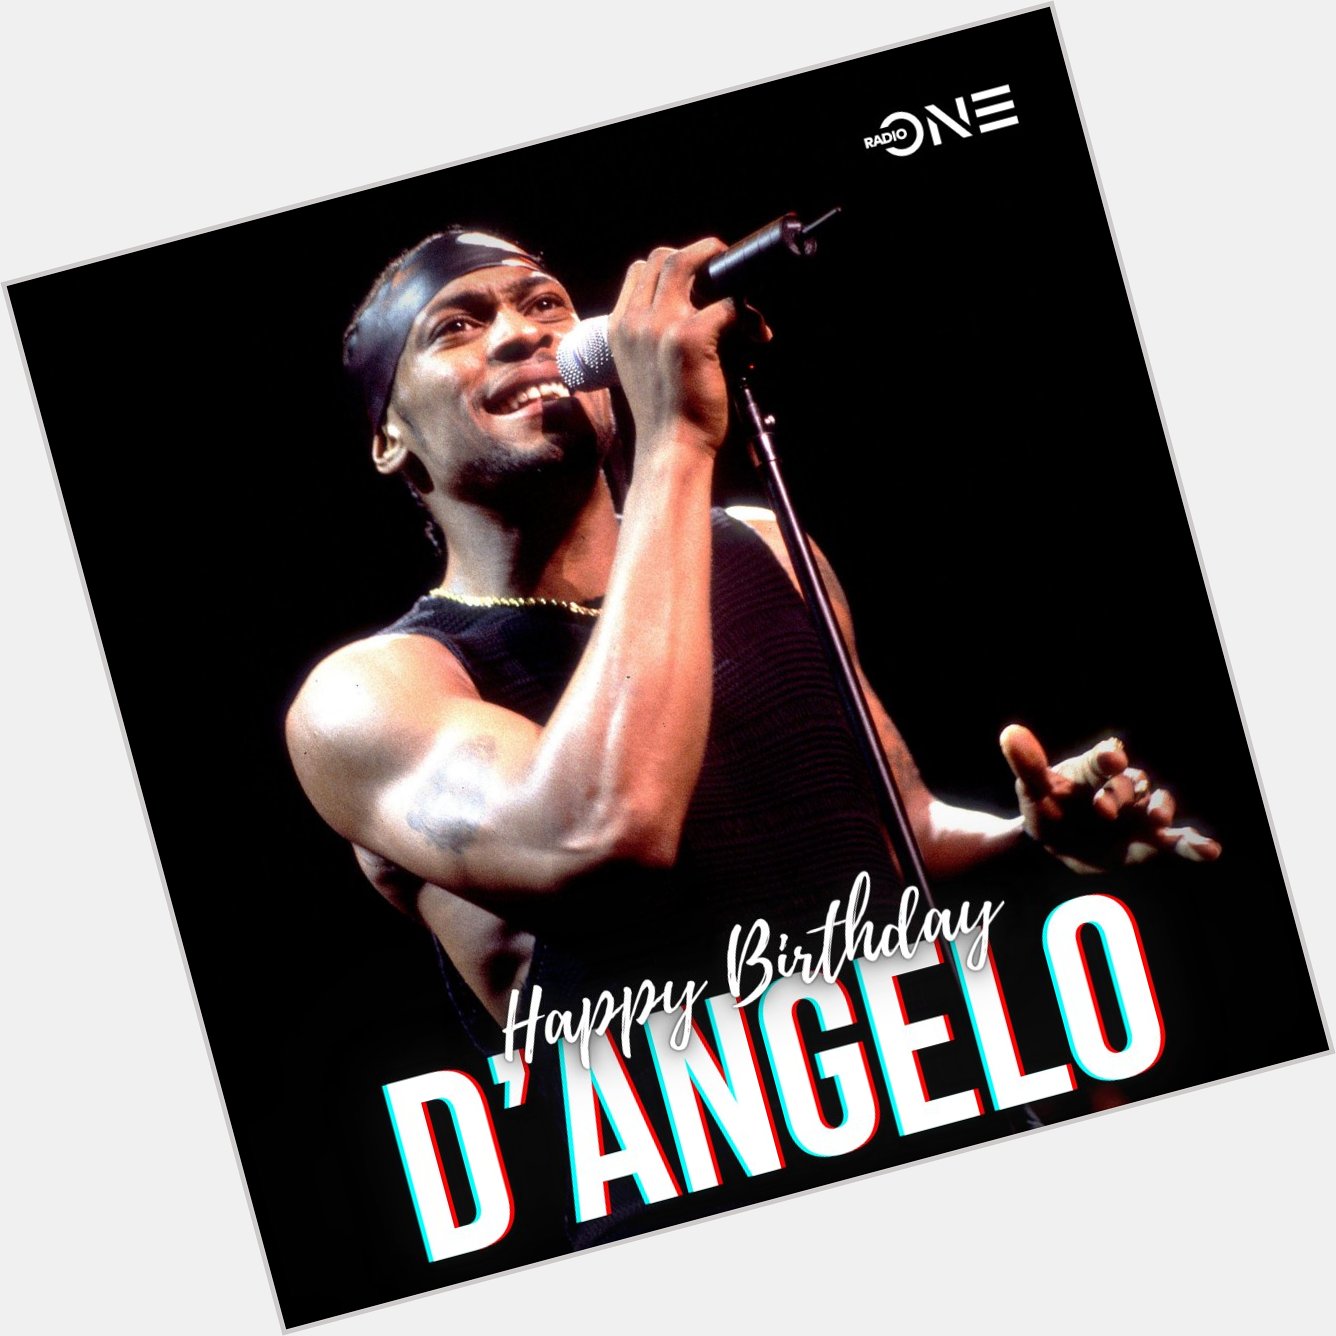 Need a little Brown Sugar, ladies? Wish D\Angelo a happy birthday!   